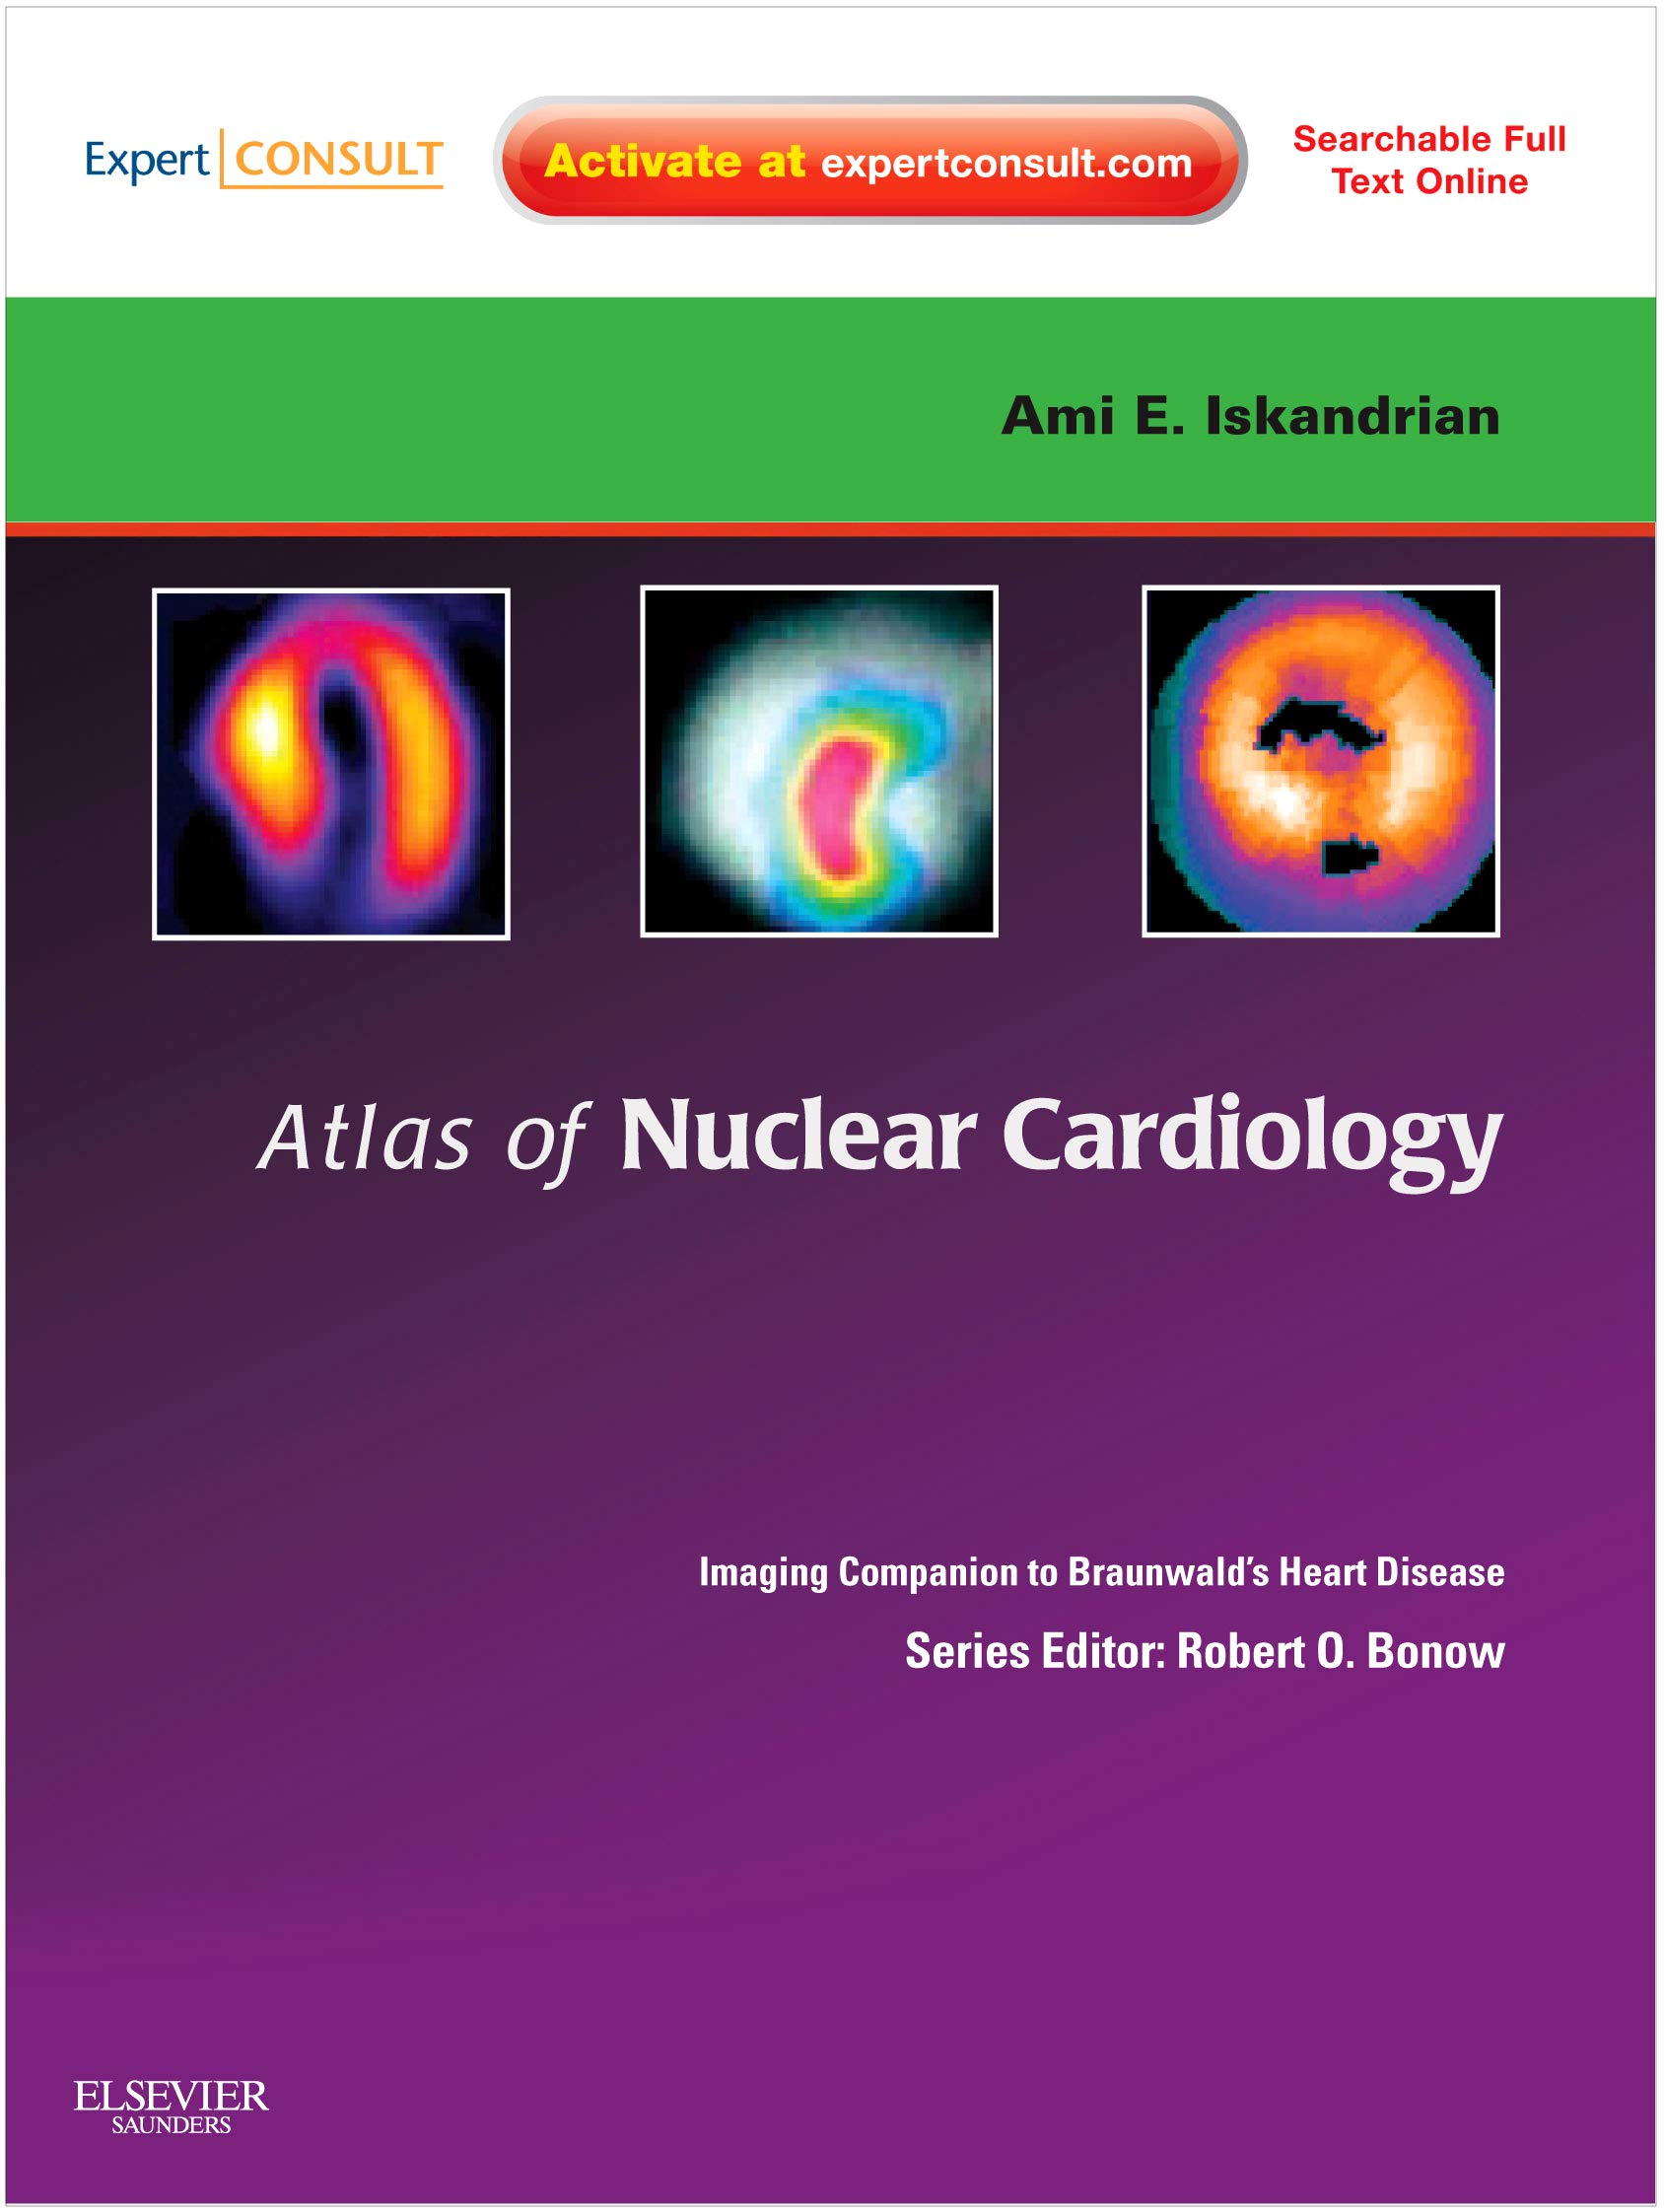 Atlas Of Nuclear Cardiology: Imaging Companion To Braunwald'S Heart Disease: Expert Consult - Online And Print